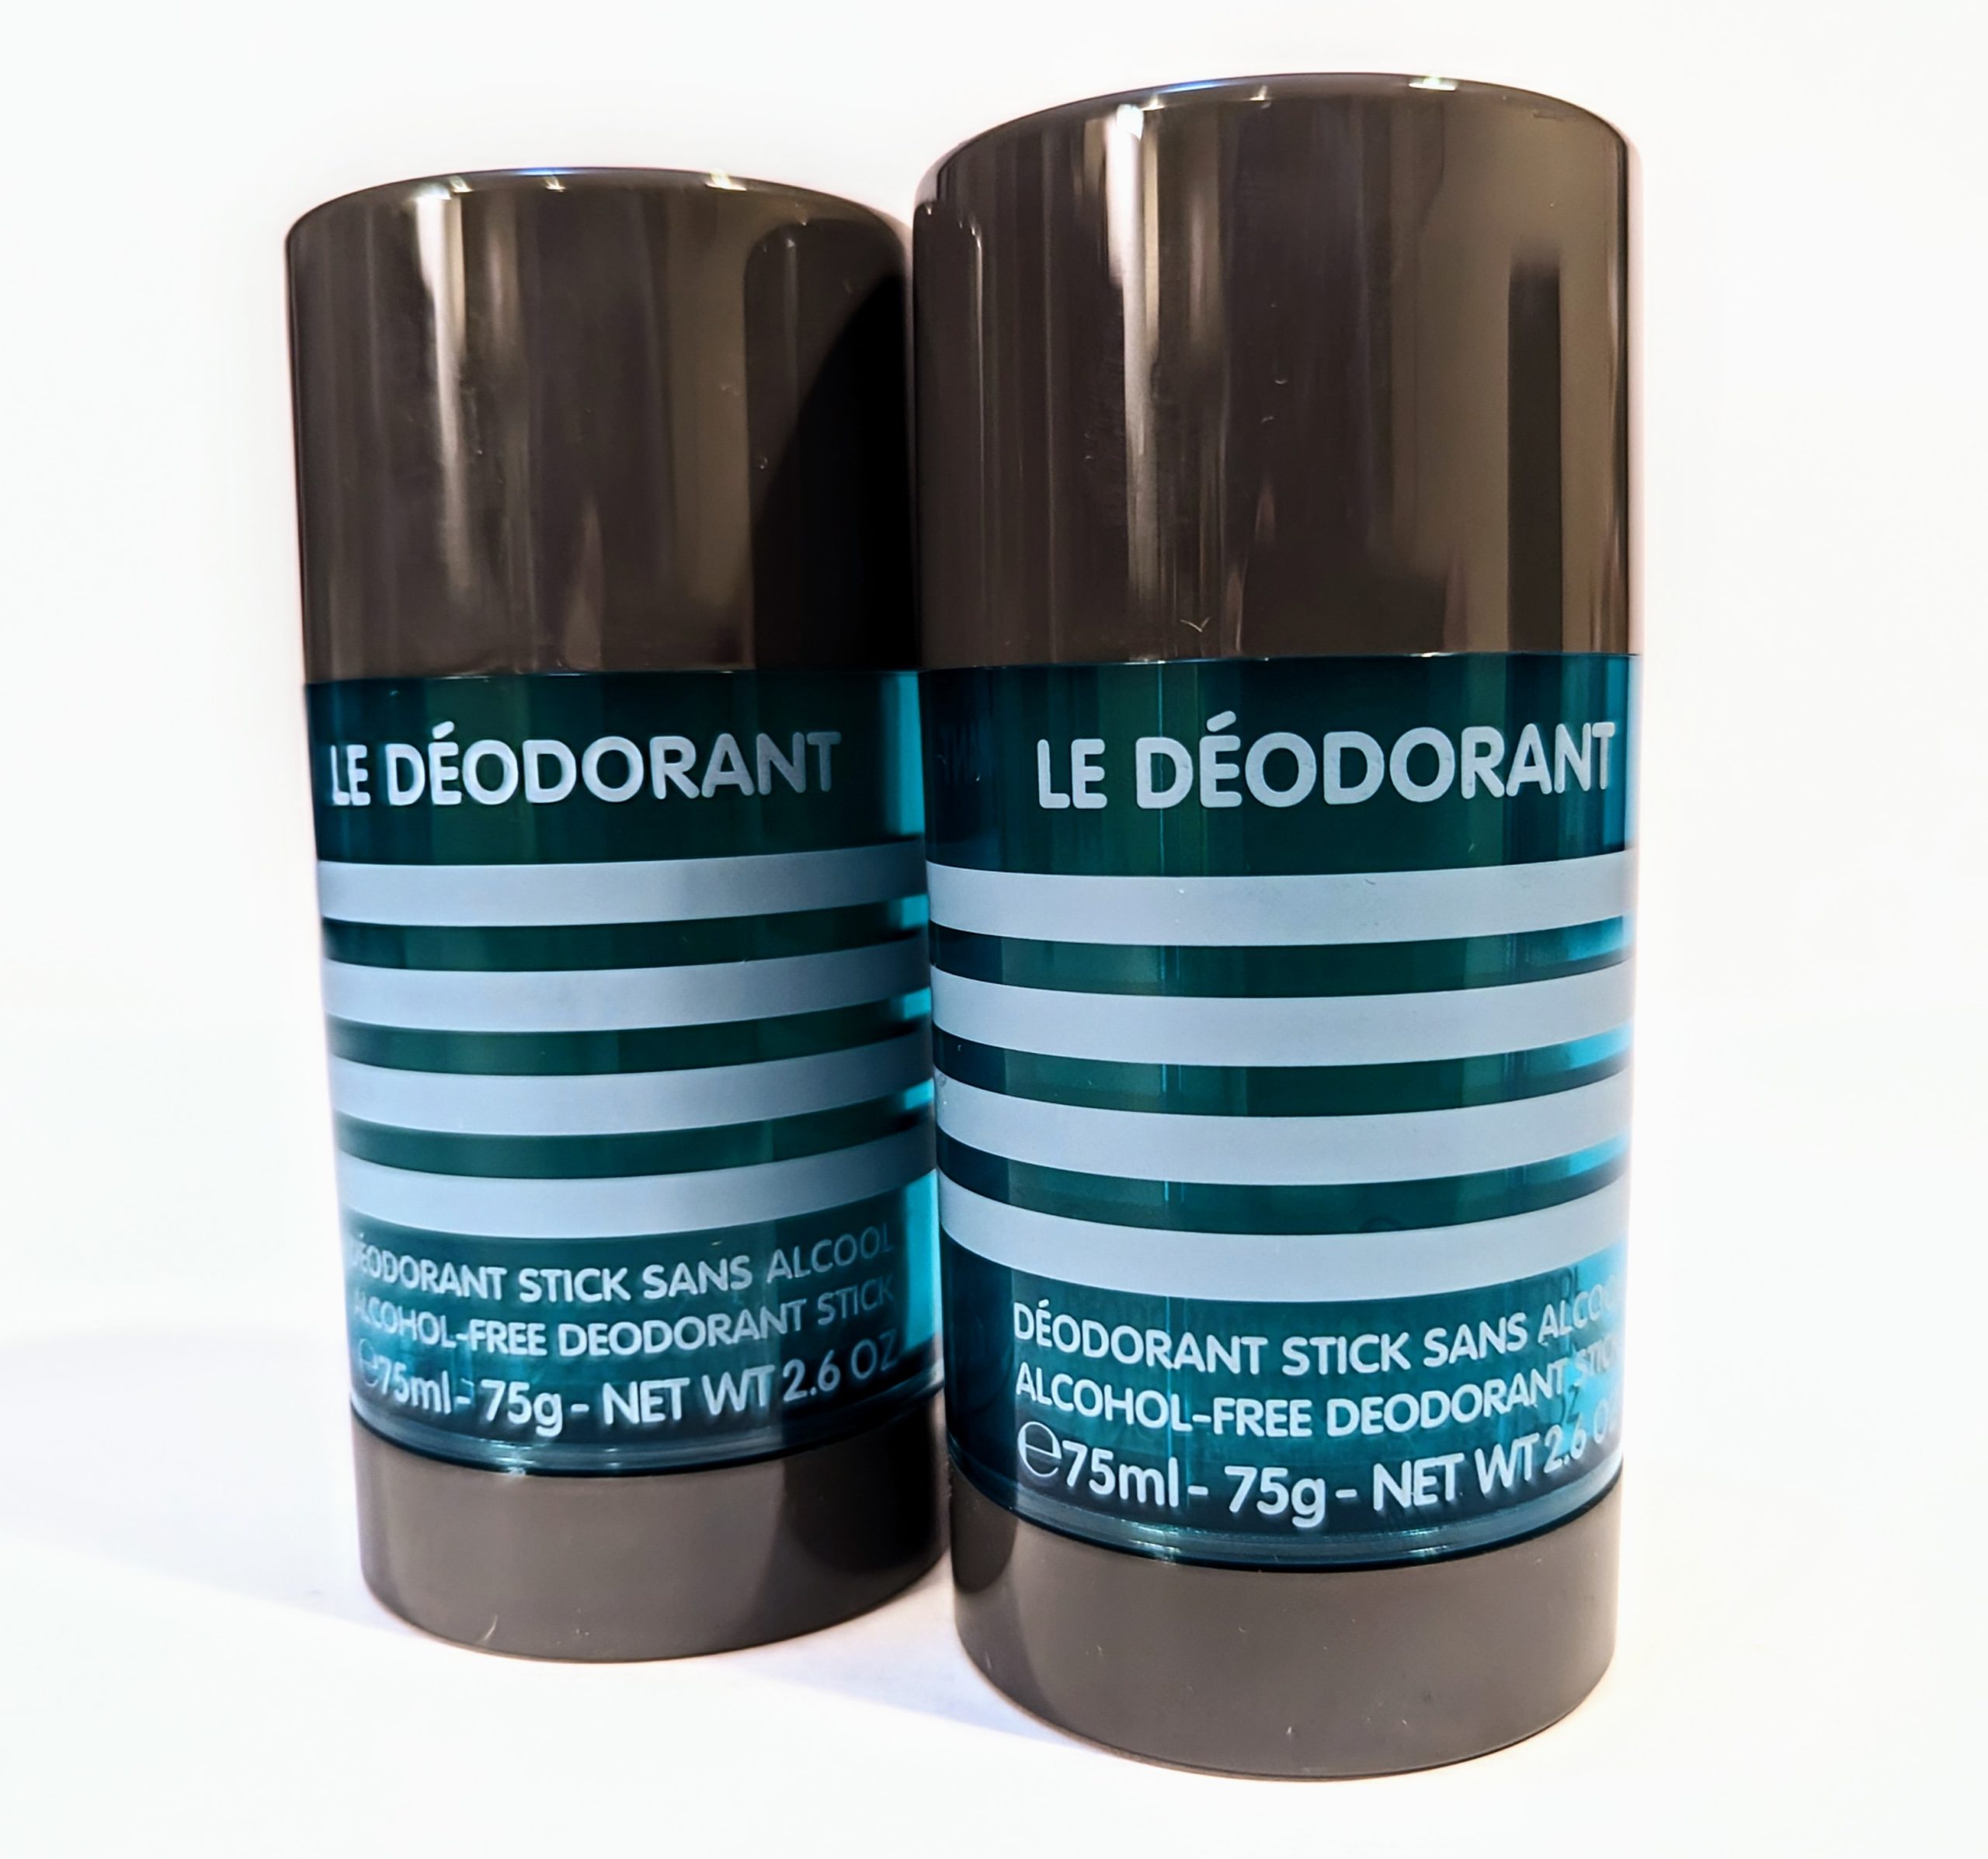 Two black deodorant sticks with teal labels displaying the product name “Le Déodorant” and information including “Alcohol-Free” and “Net Wt 2.6 oz / 75ml.